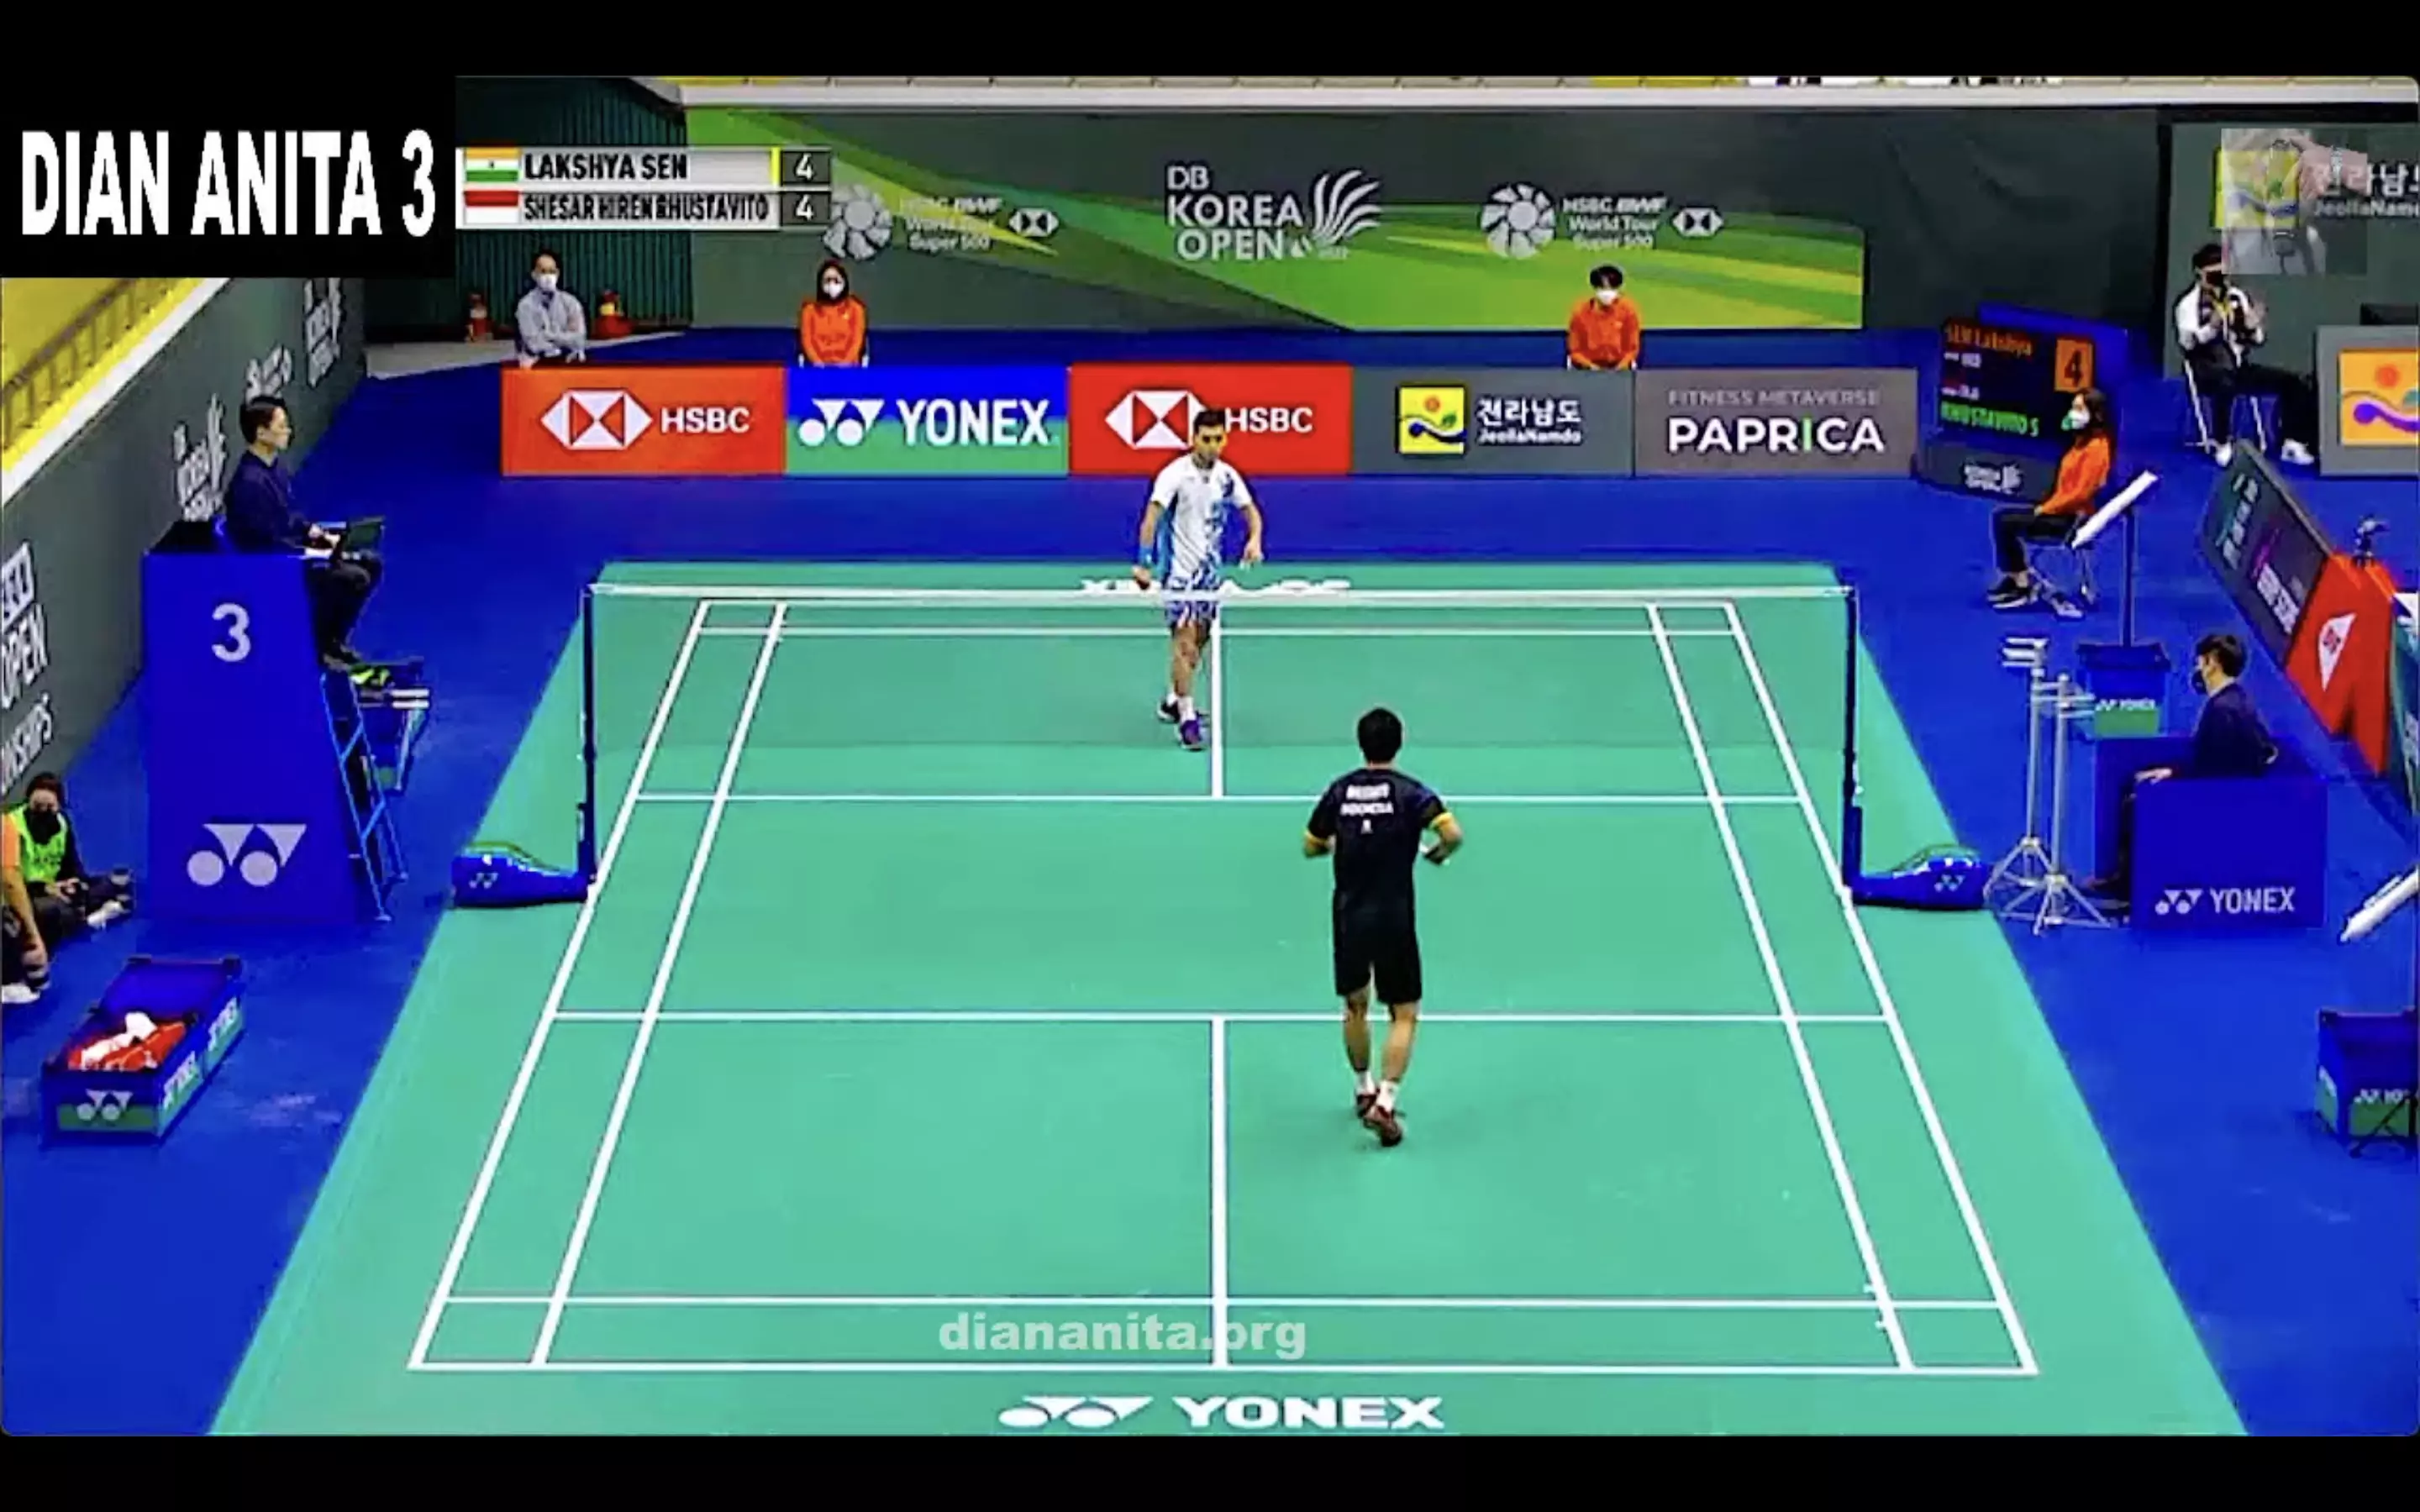 Lakshya Sen makes a good start and is locked at 4 ALL!